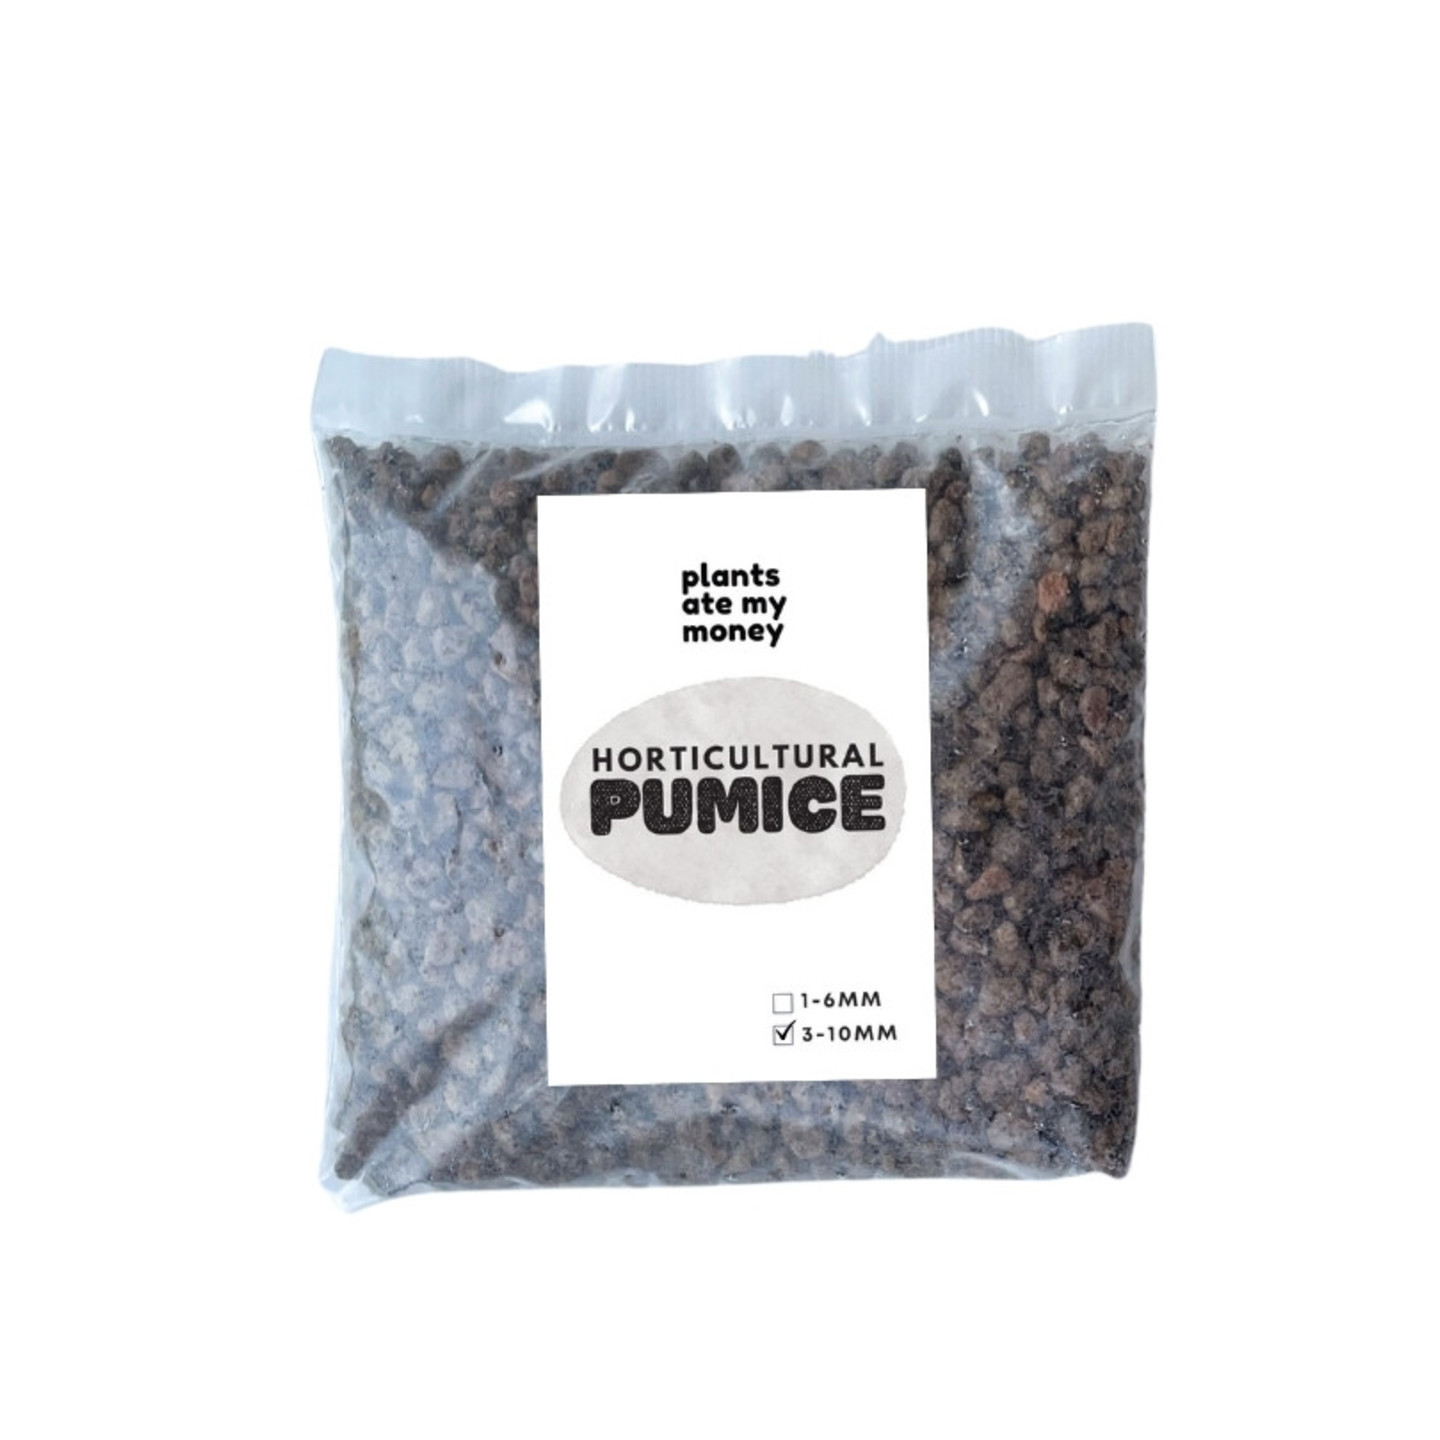 2 Litres - Pumice 3-10mm